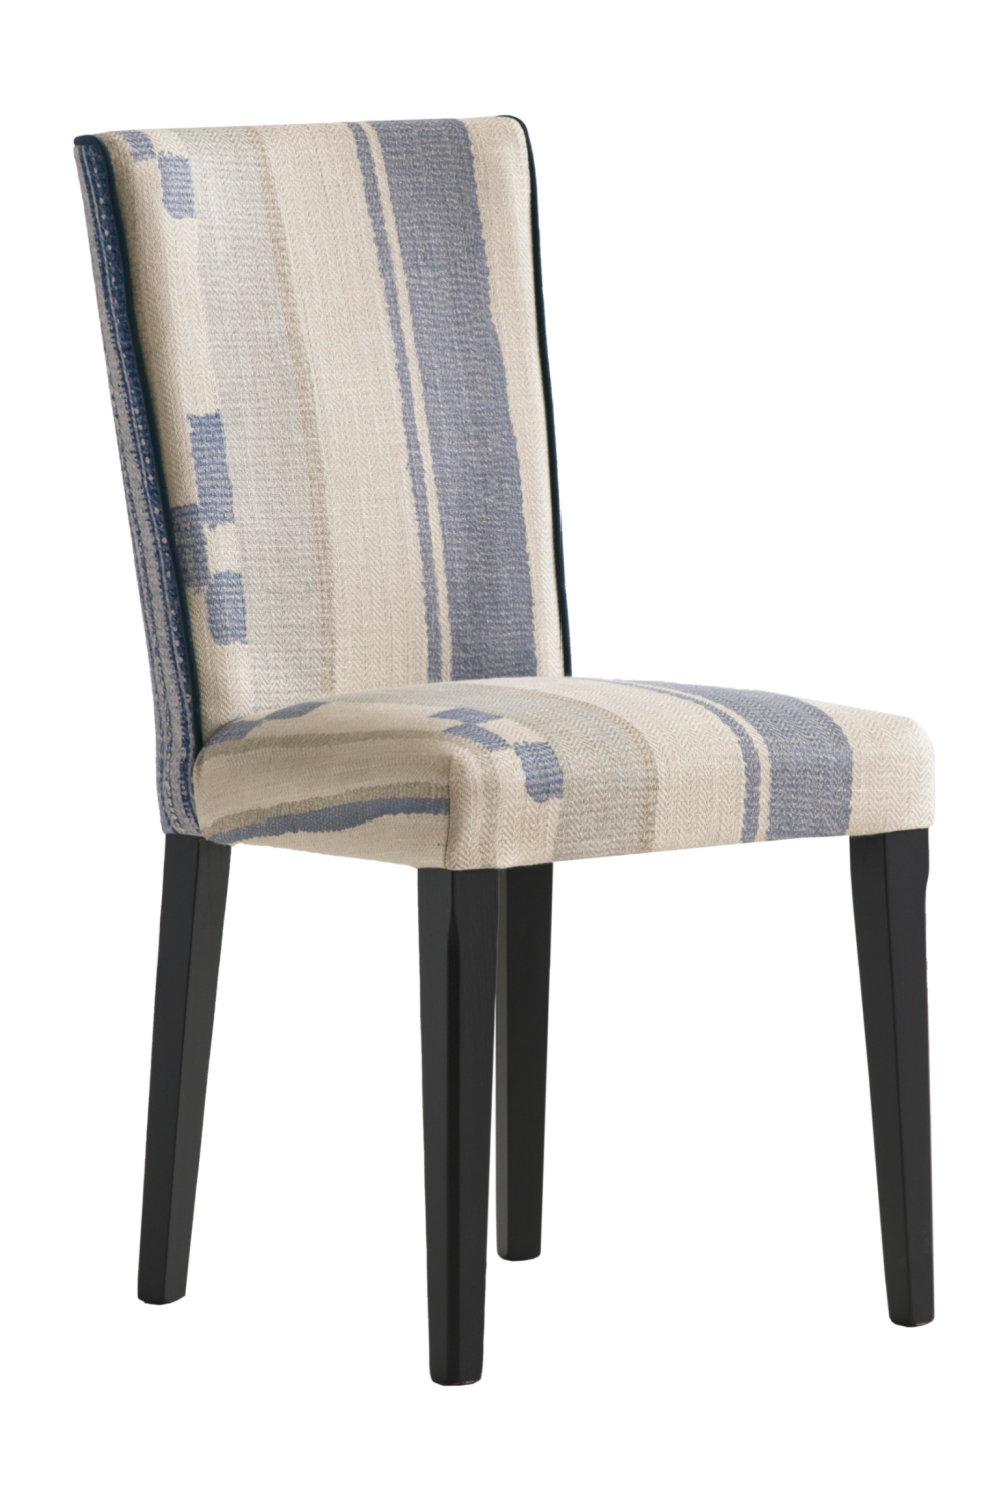 Patterned Fabric Upholstered Dining Chair | Andrew Martin | OROA.com